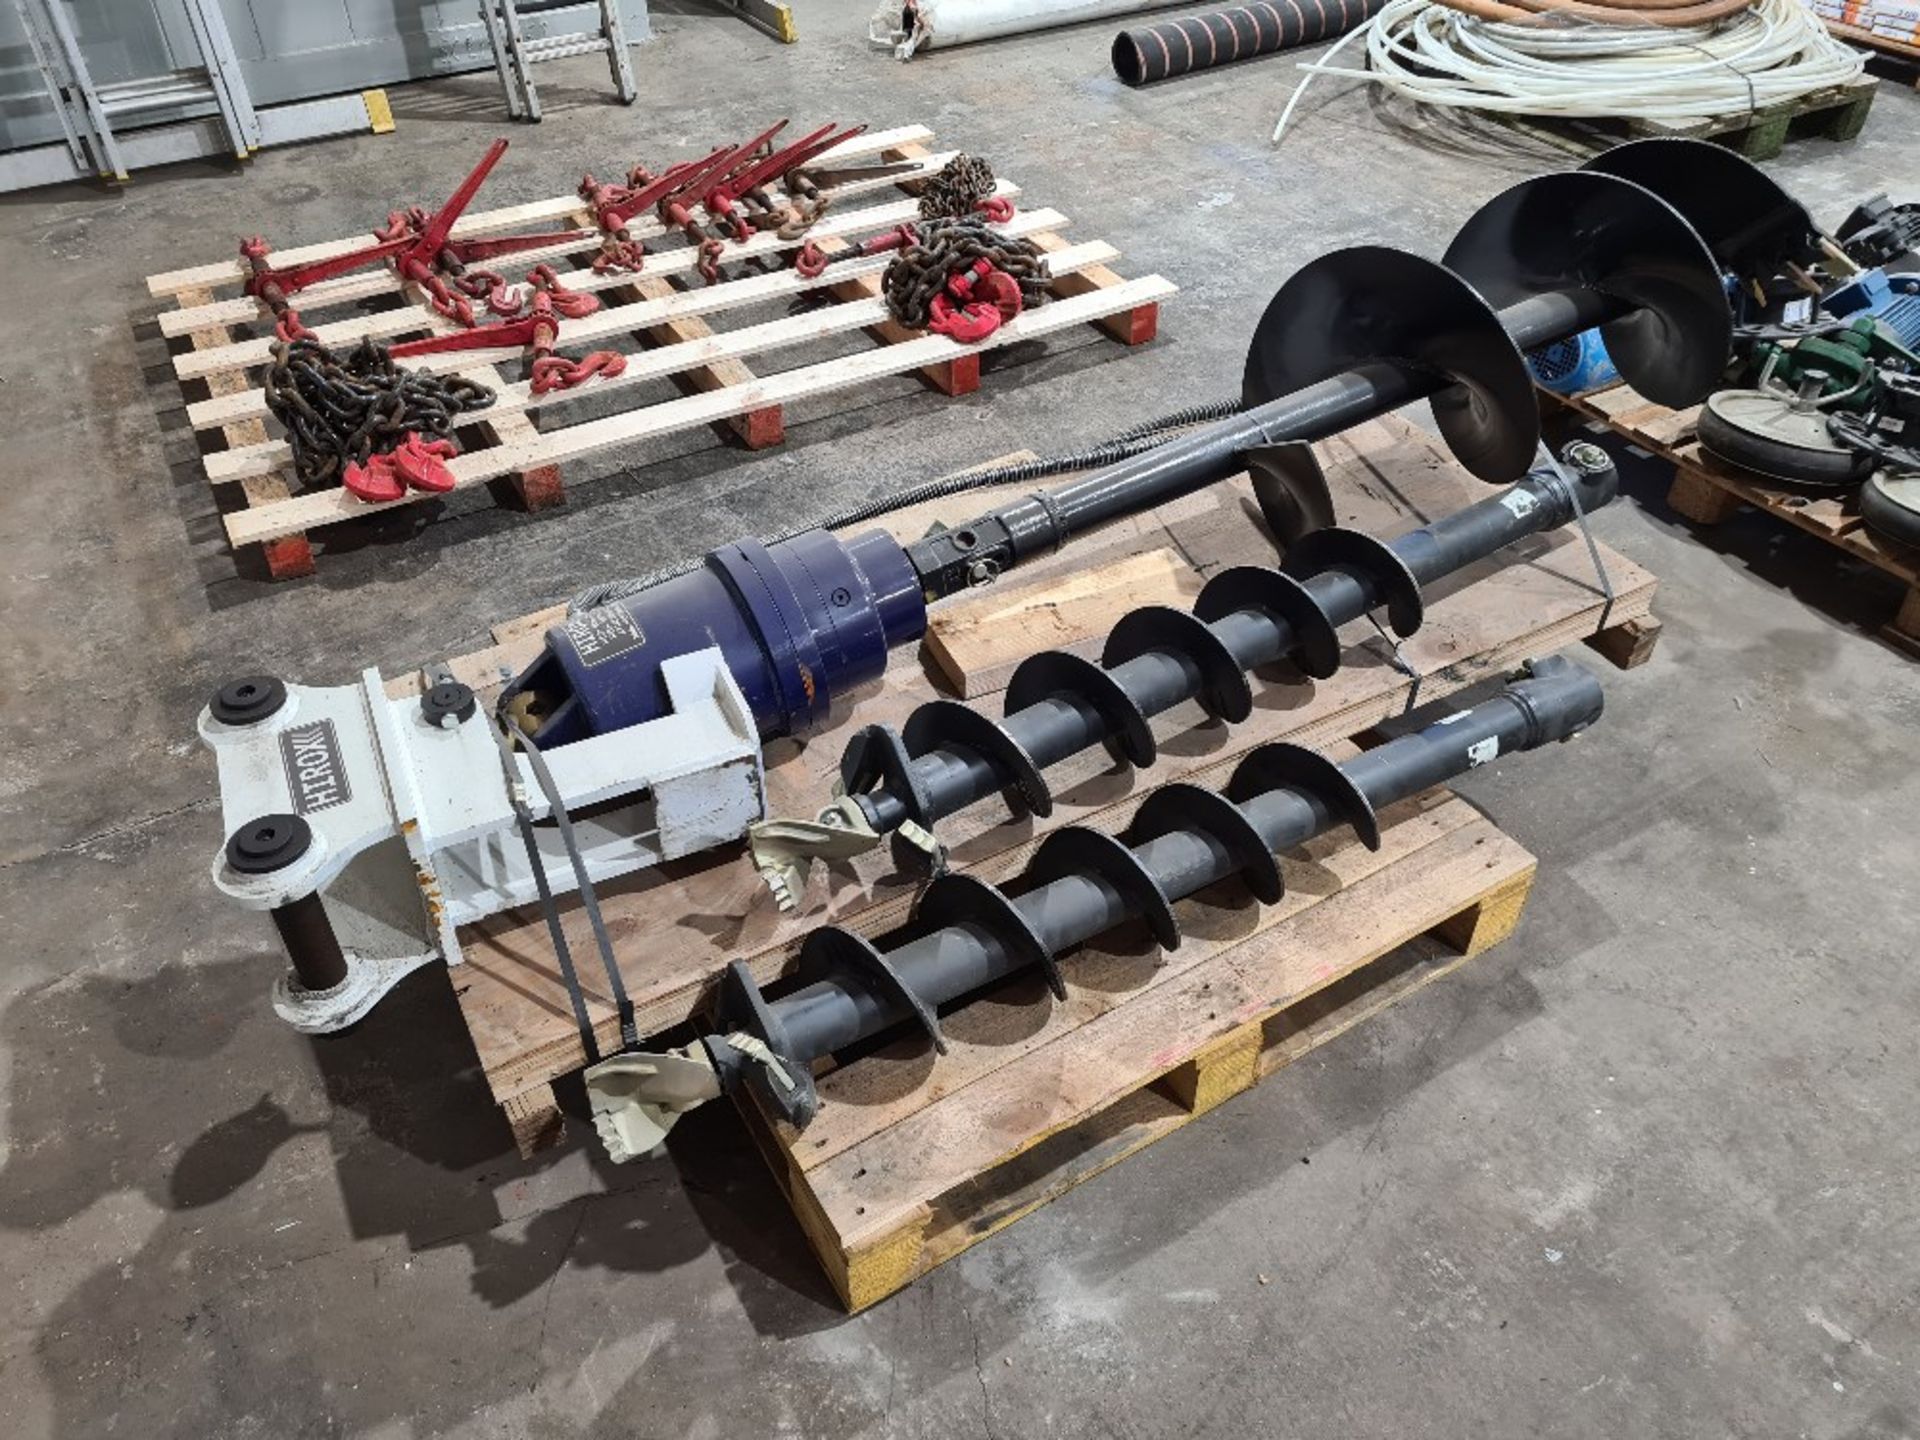 Hirox auger attachment for digger, 45mm pins, 3 x augers.